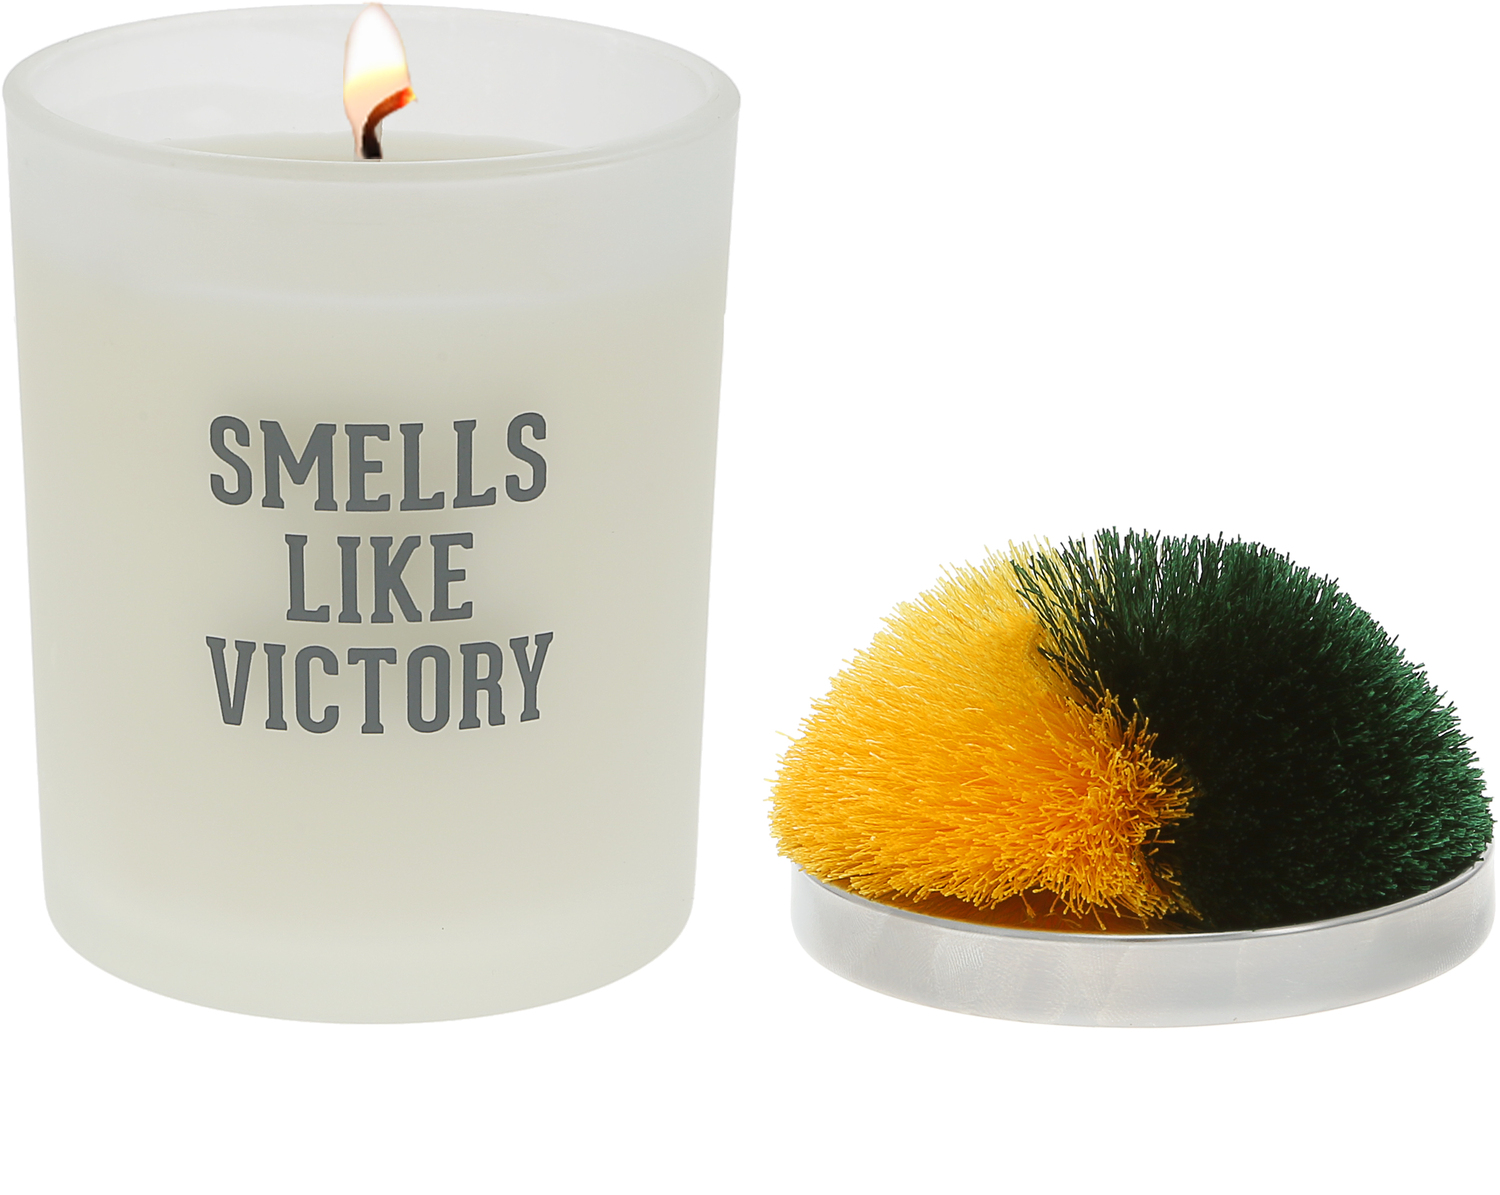 Victory - Green & Yellow by Repre-Scent - Victory - Green & Yellow - 5.5 oz - 100% Soy Wax Candle with Pom Pom Lid
Scent: Tranquility